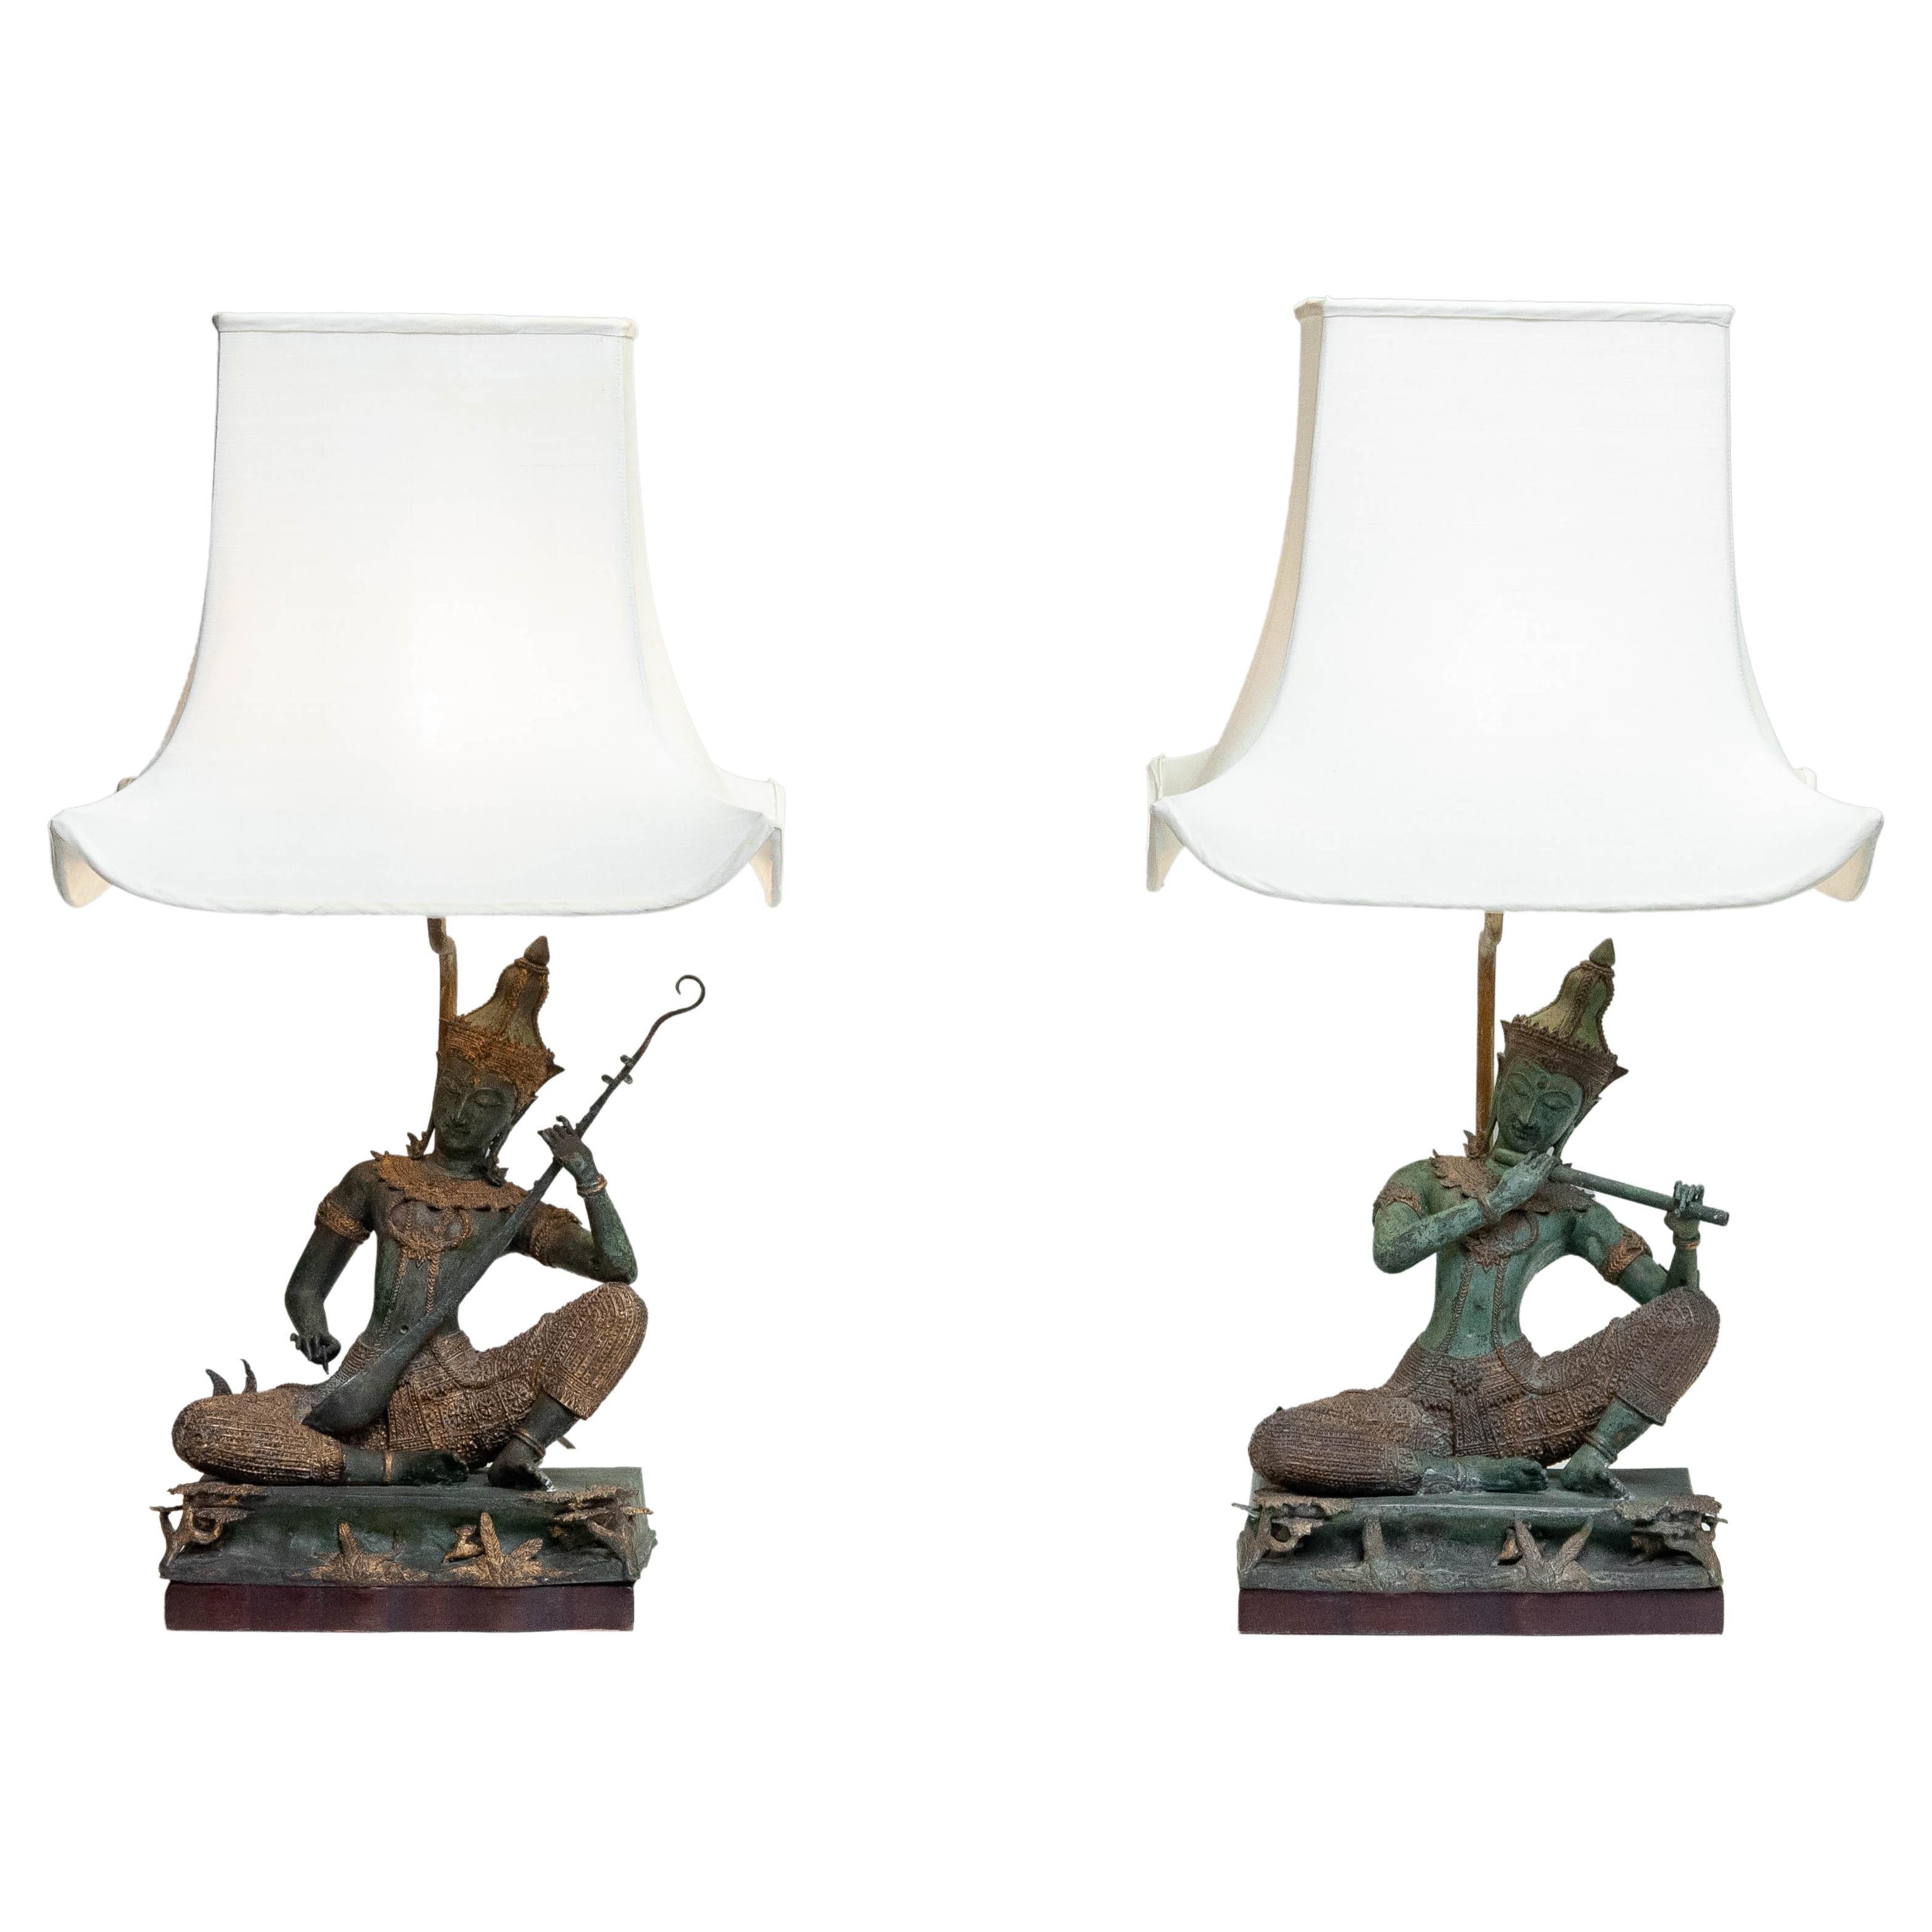 1970s Asian Vintage Table Lamps with Bronze / Gild Statues of Phra Aphai Mani